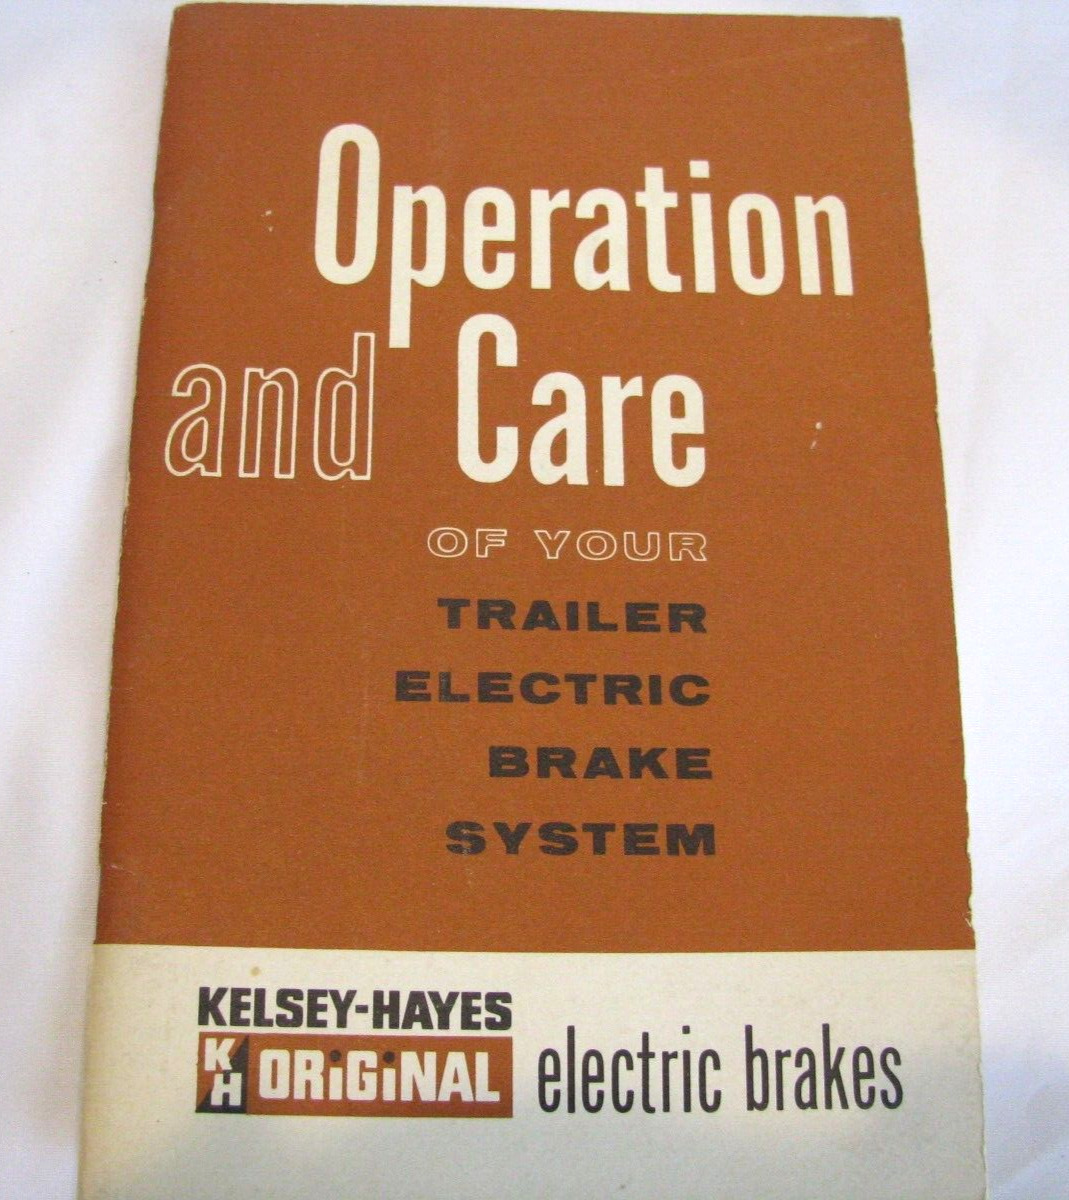 Vintage 1963 Kelsey-Hayes Electric Trailer Brakes Operation and Care Manual